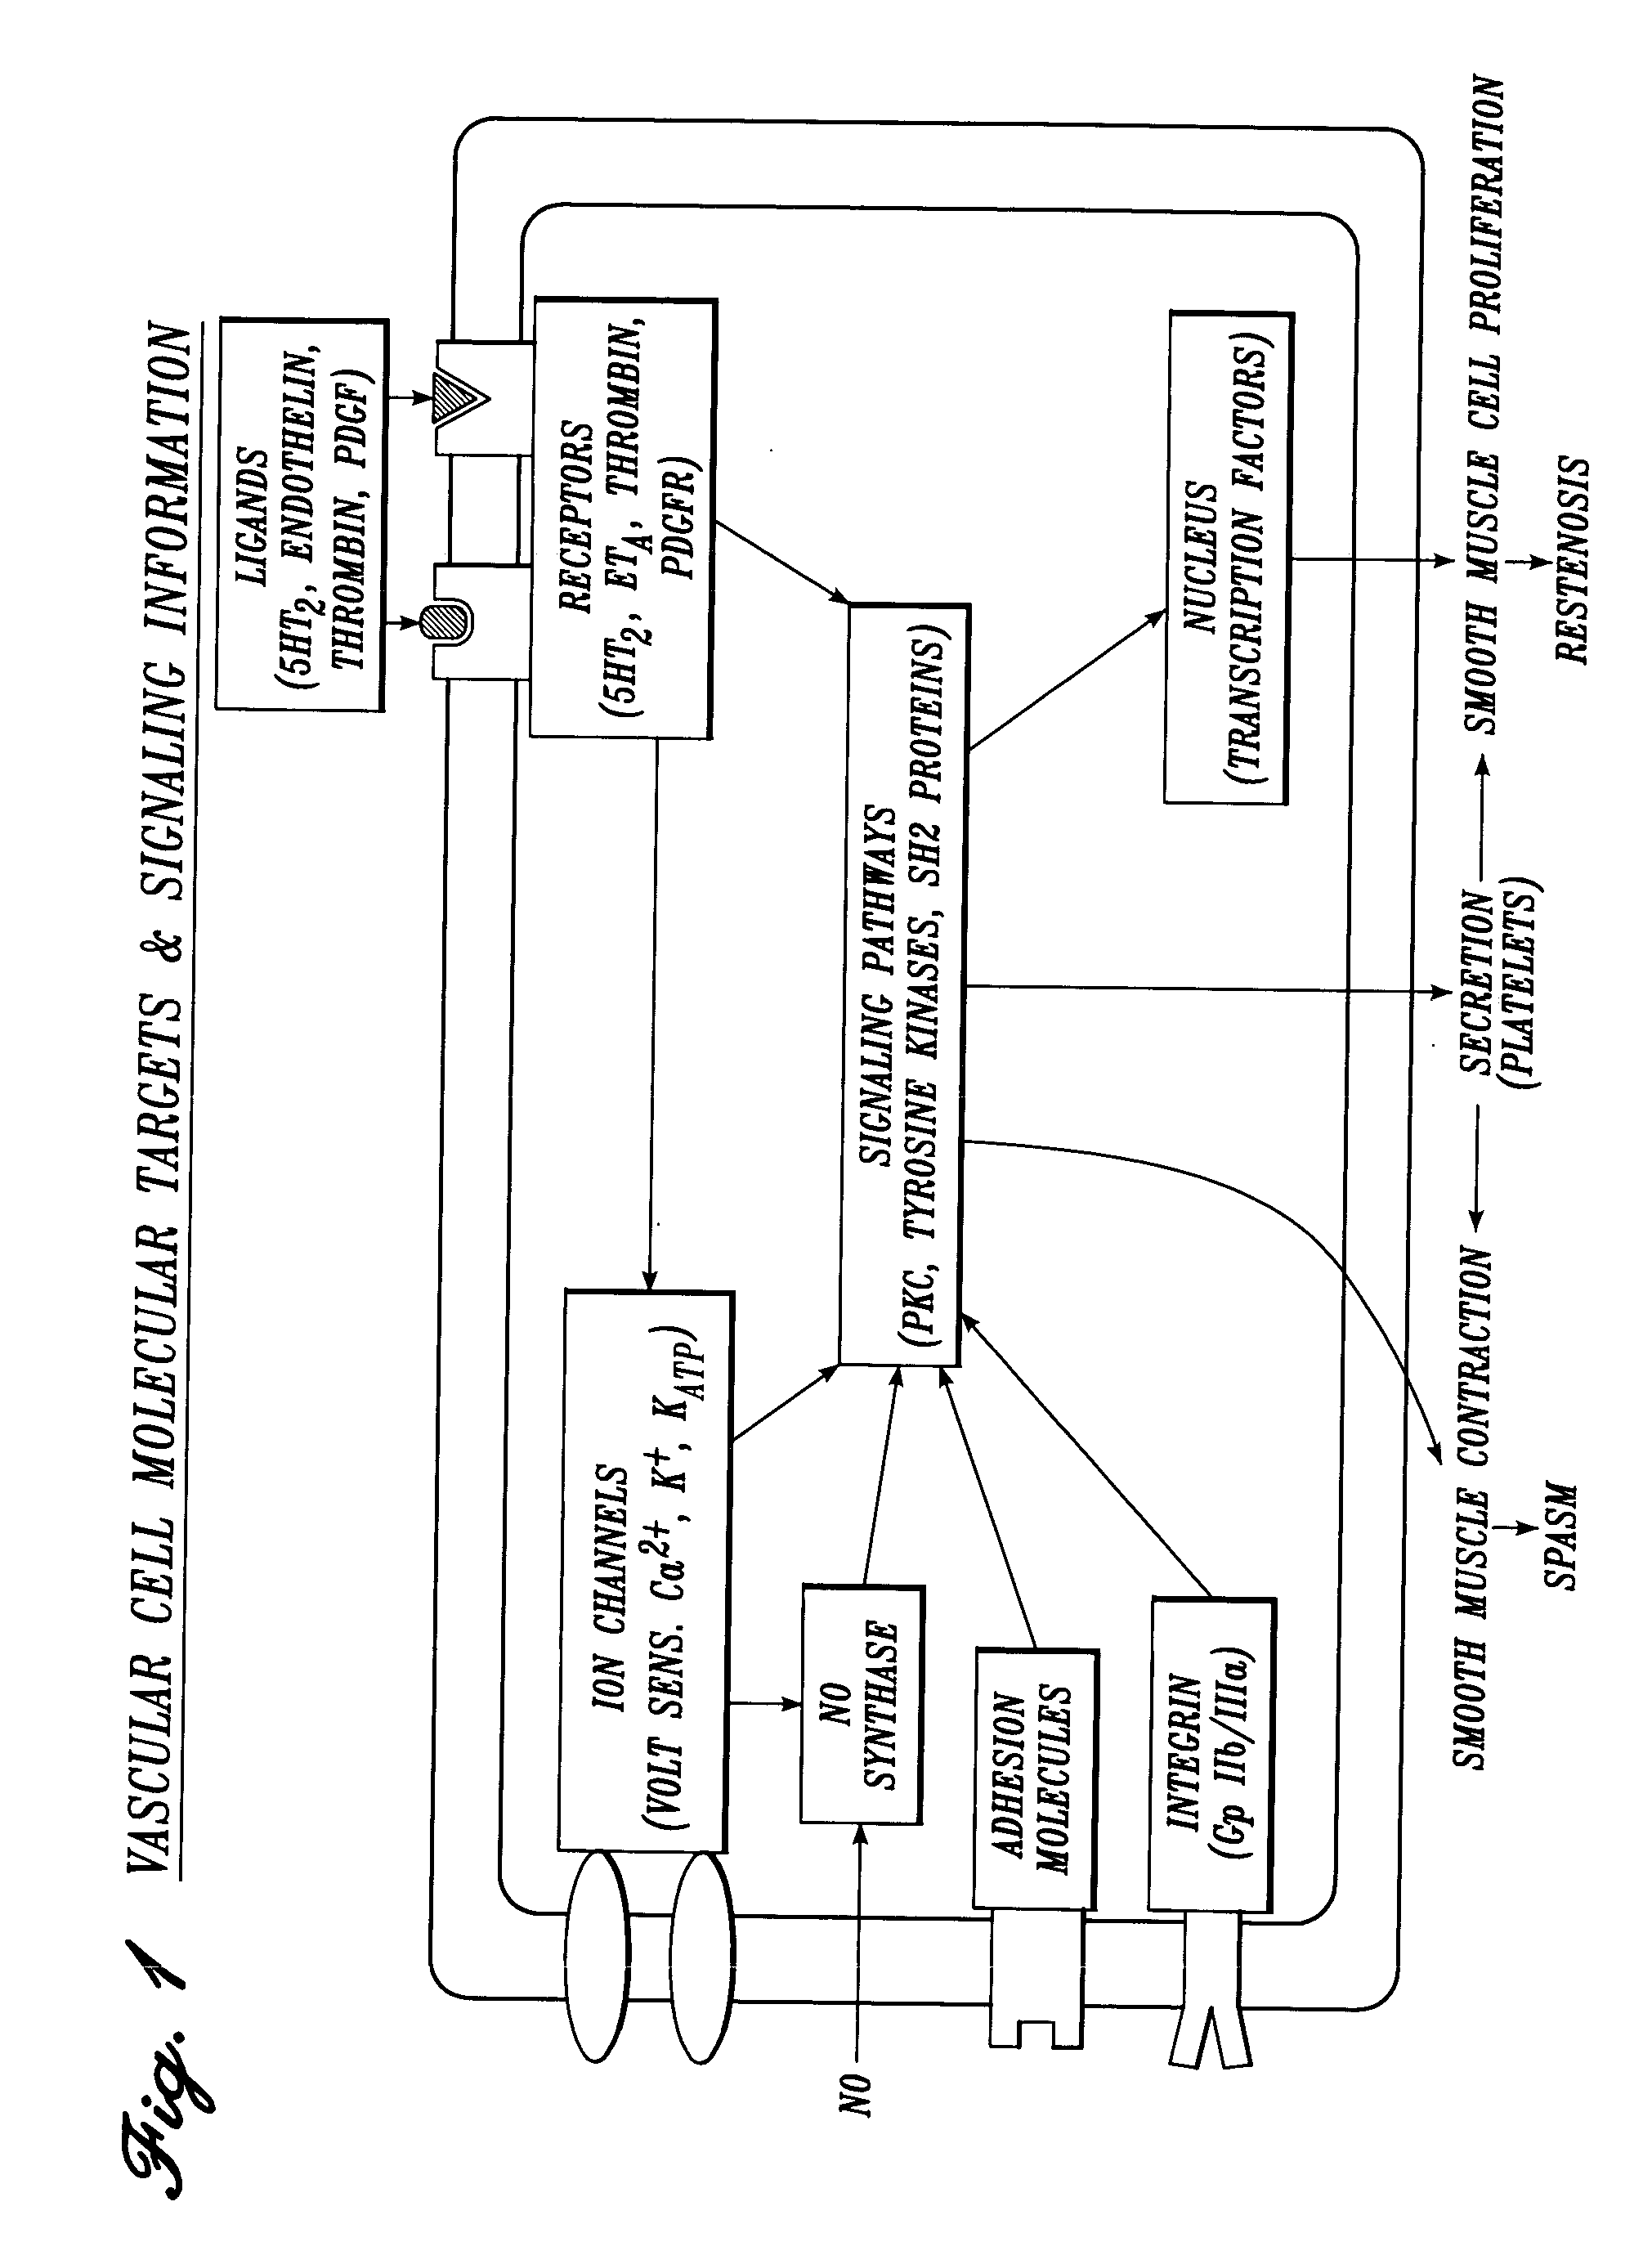 Vascular irrigation solution and method for inhibition of pain, inflammation, spasm and restenosis